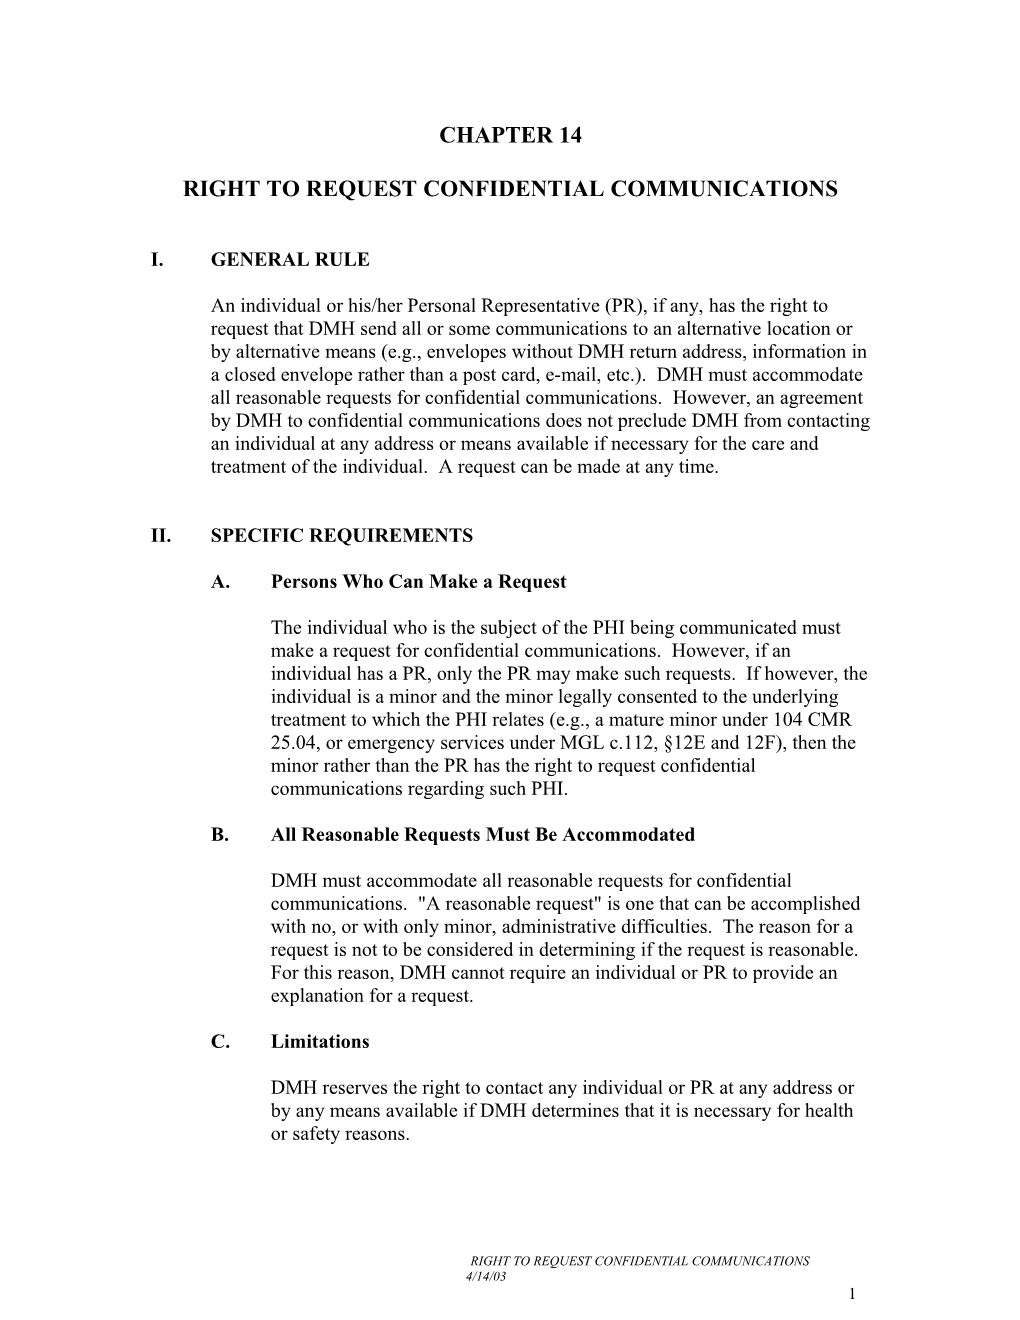 Right to Request Confidential Communications